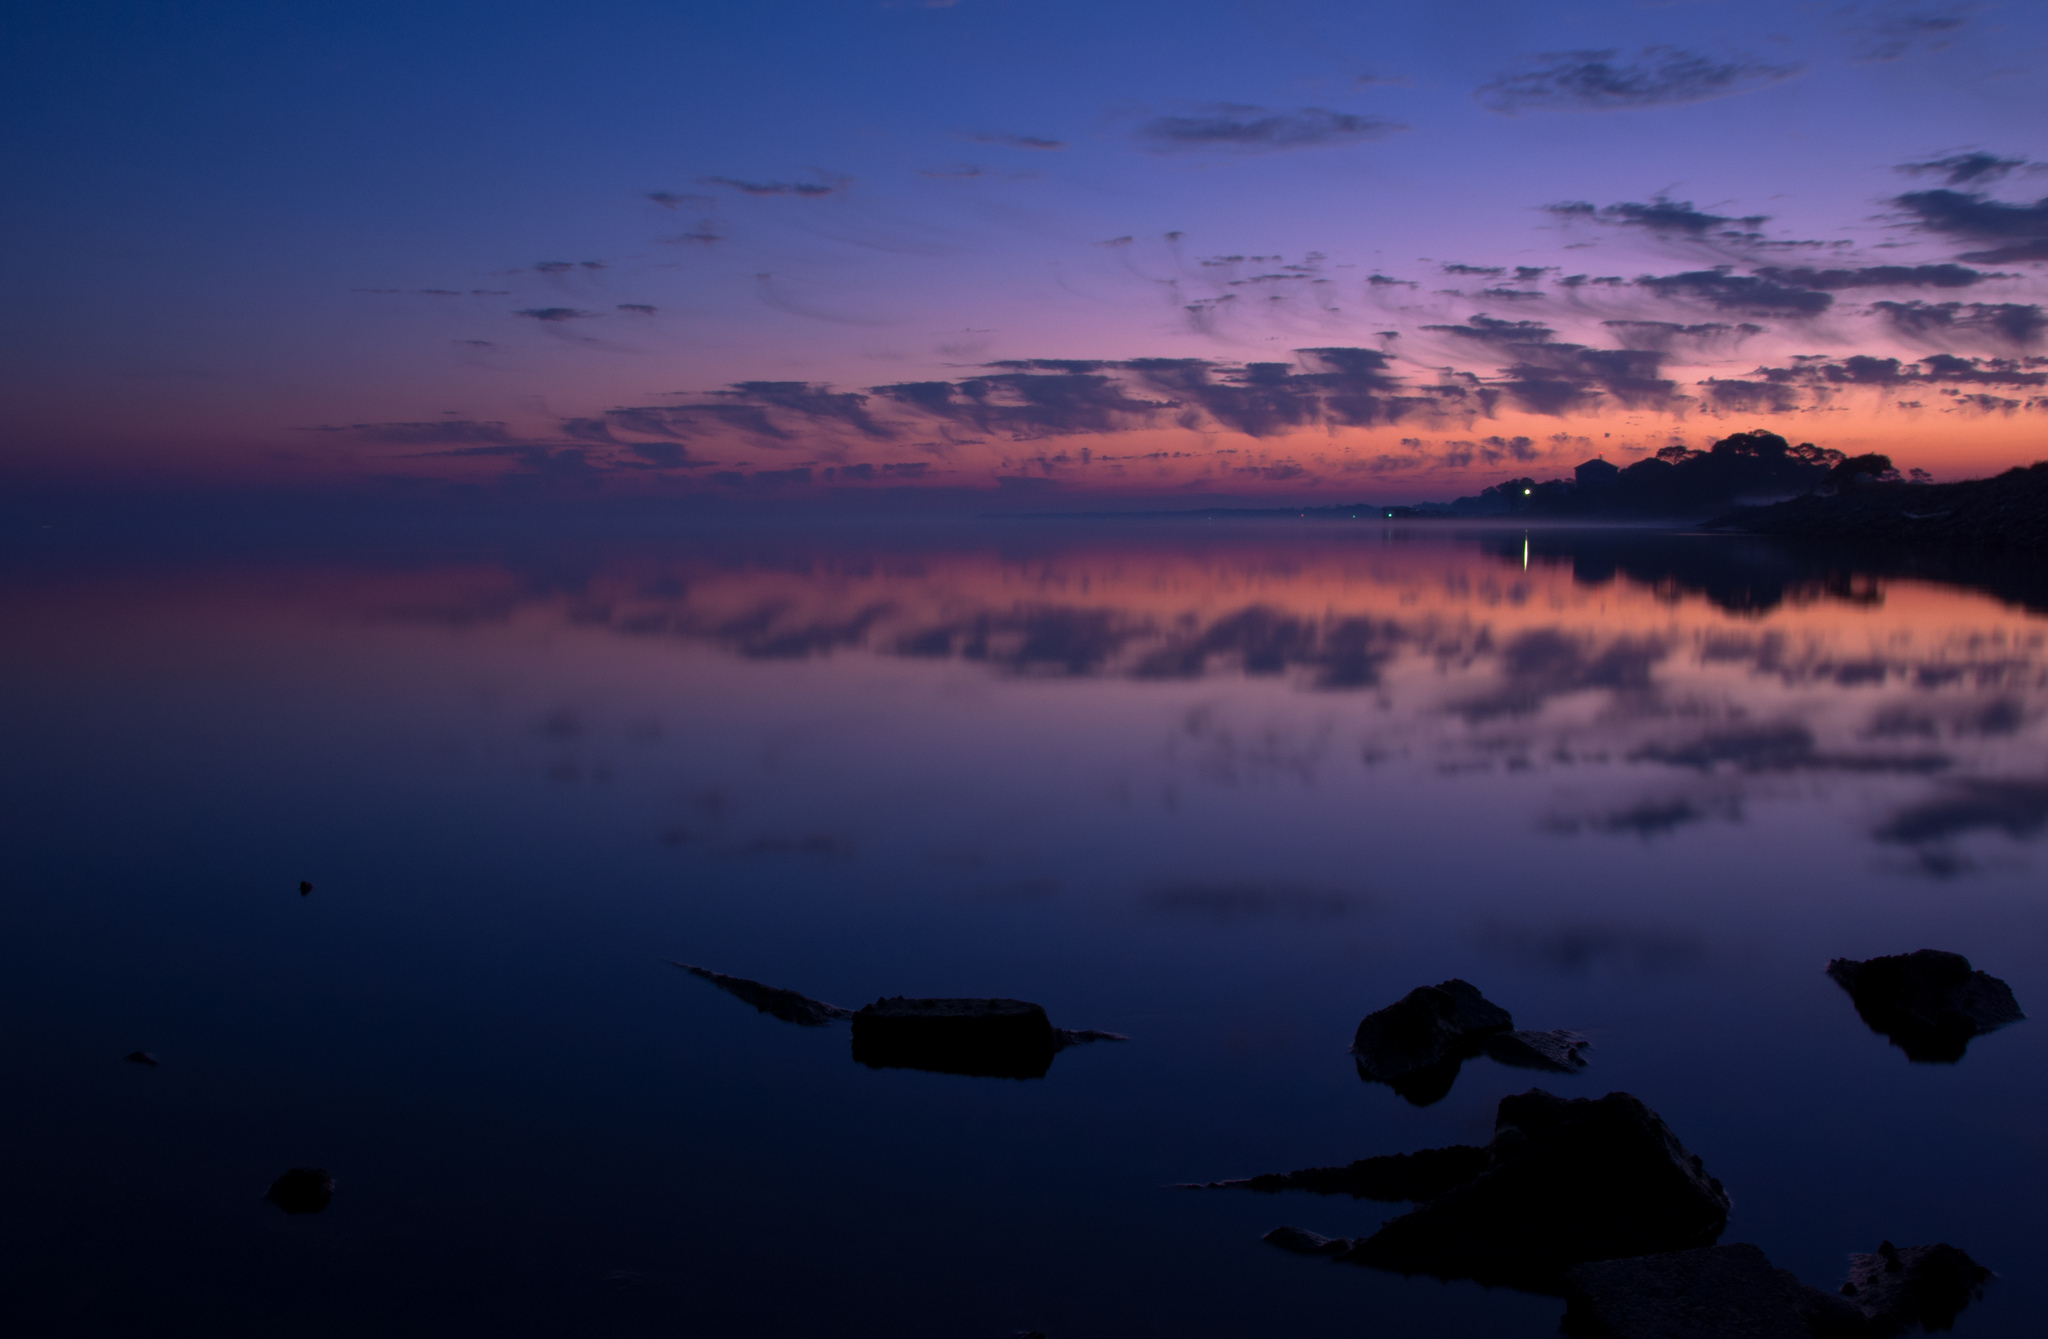  gulf coast dawn morning sky clouds reflection wallpapers